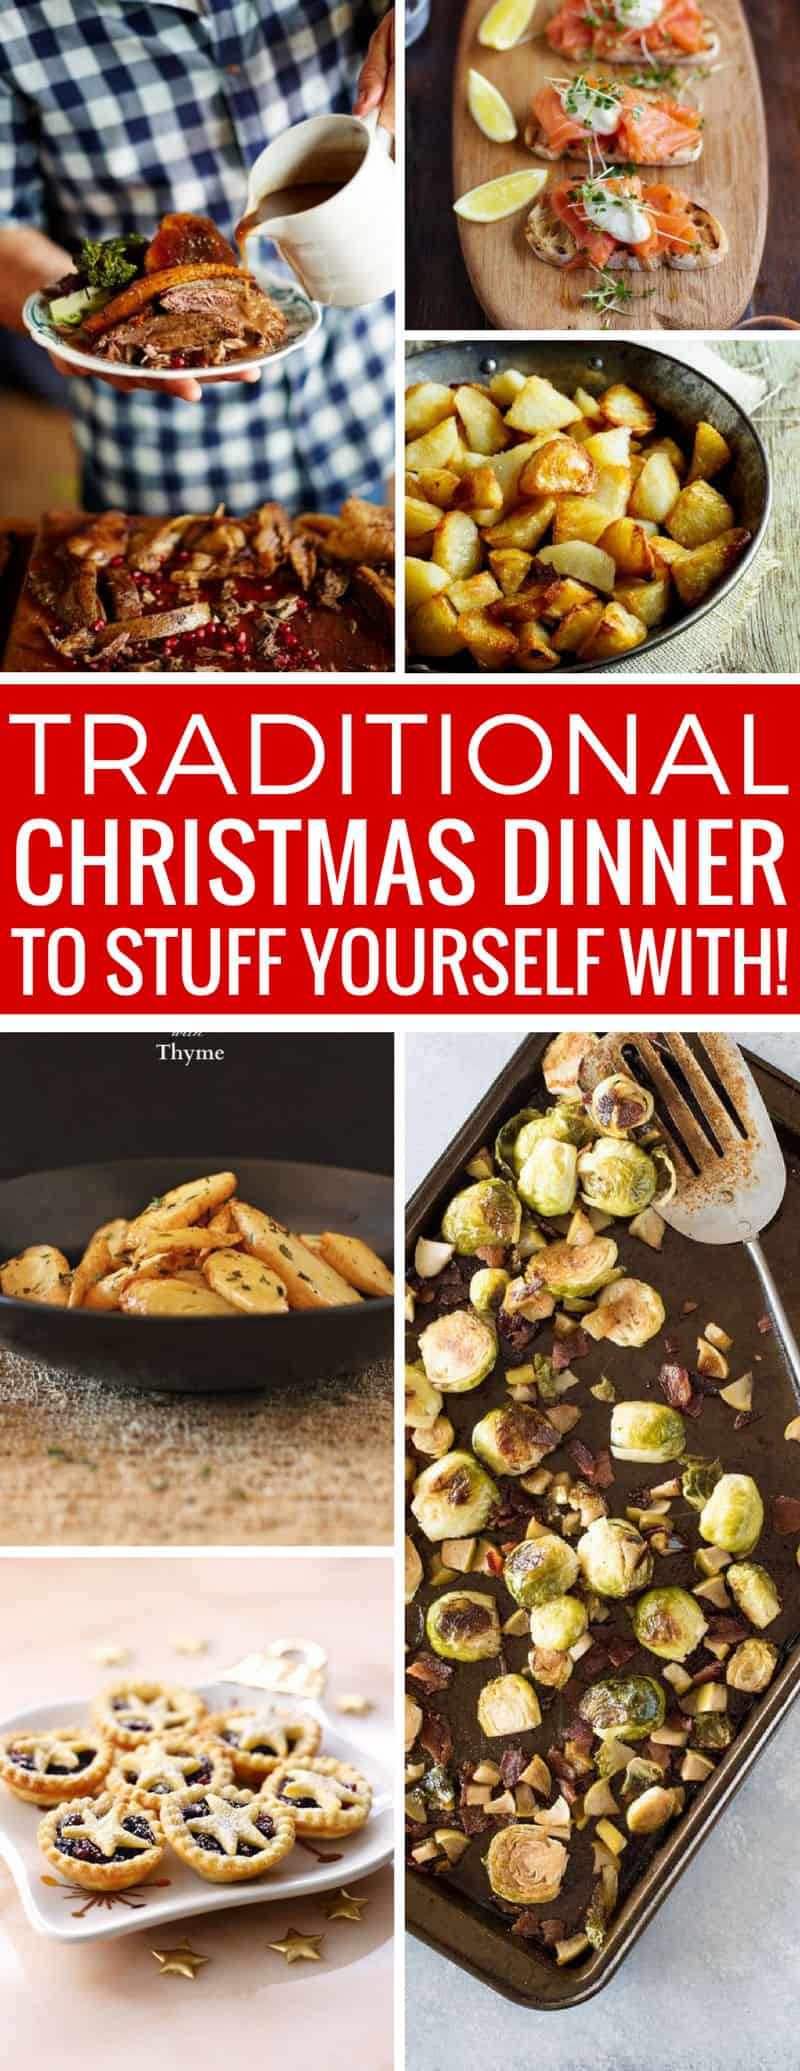 Oh boy - this traditional Christmas dinner menu looks amazing - and I know we will all be in a food coma afterwards! Thanks for sharing!